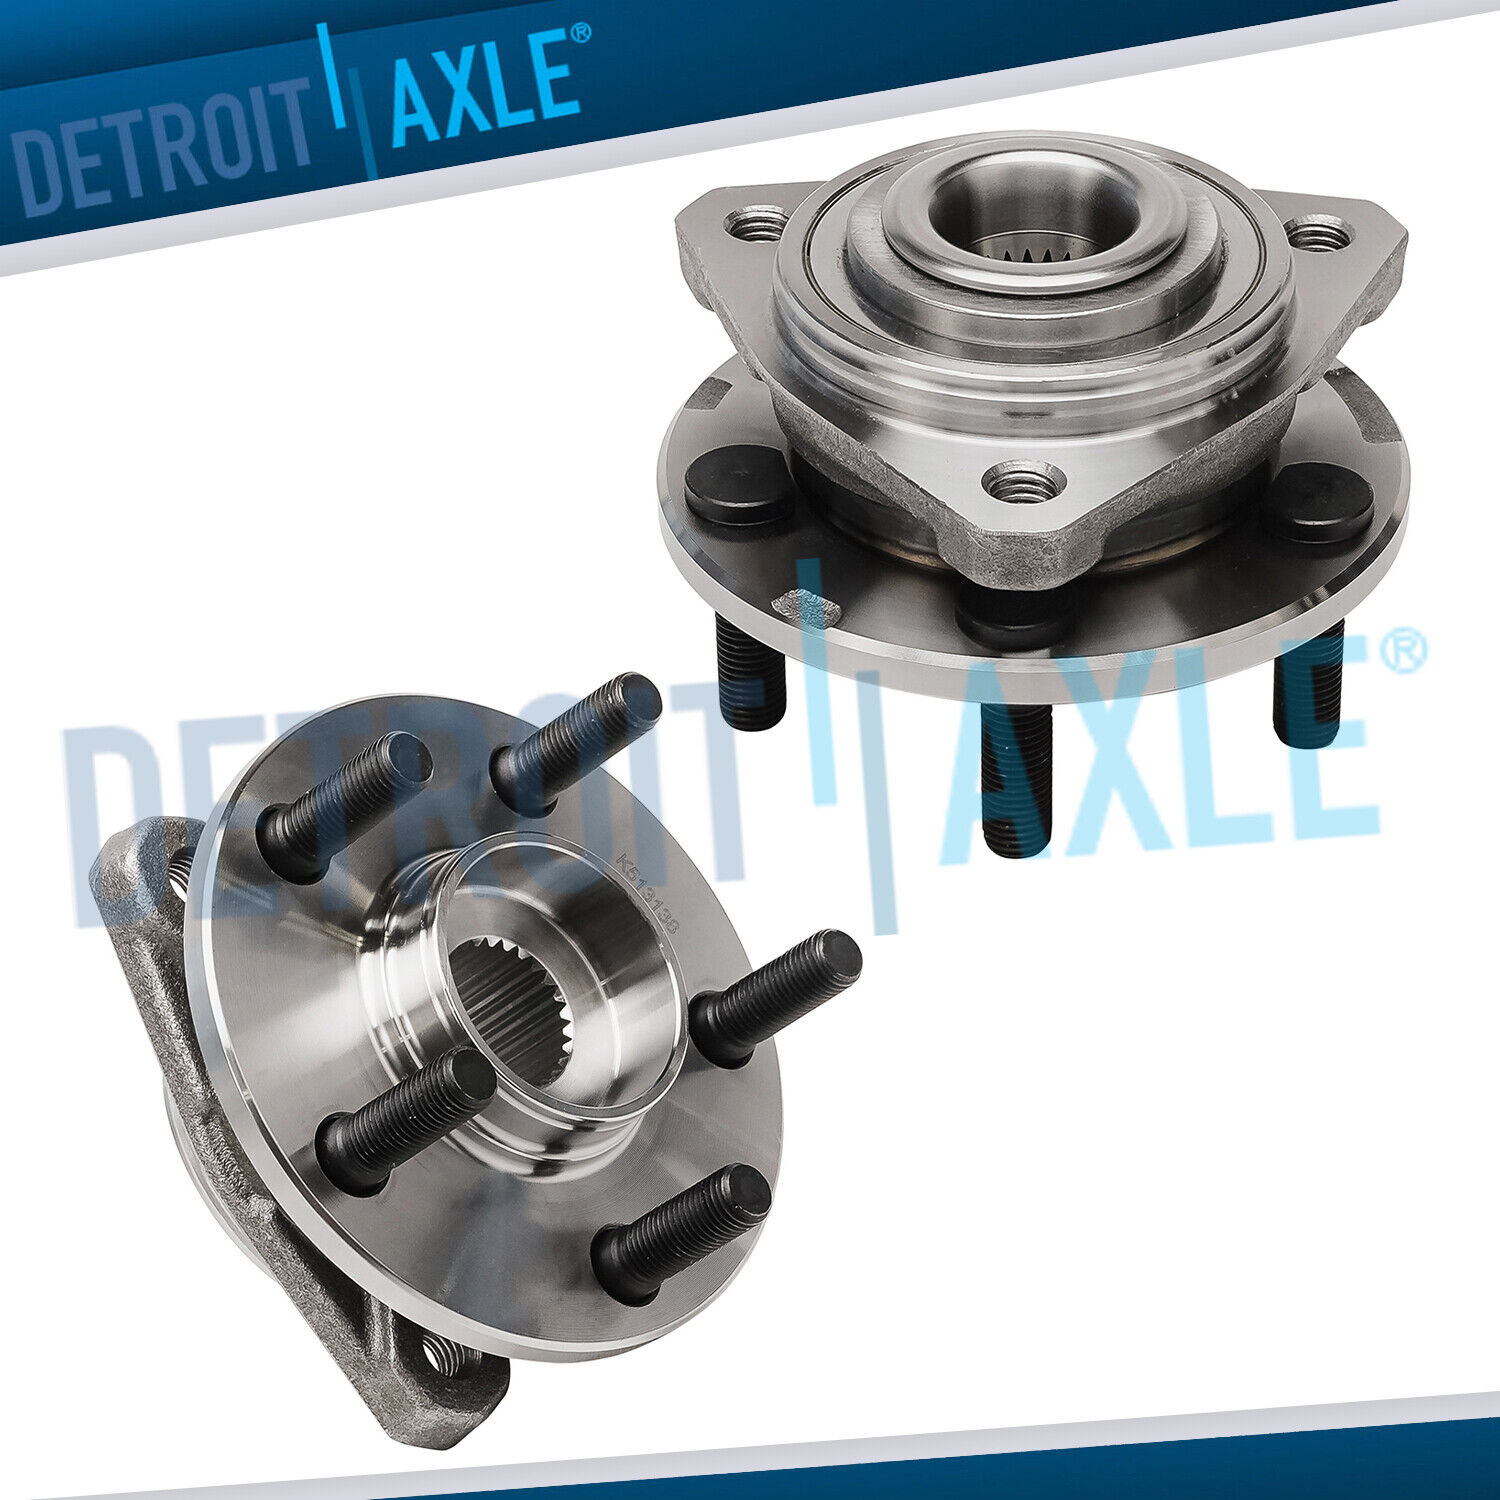 Pair Front Wheel Hubs for Chrysler Sebring Cirrus Dodge Stratus Plymouth Breeze